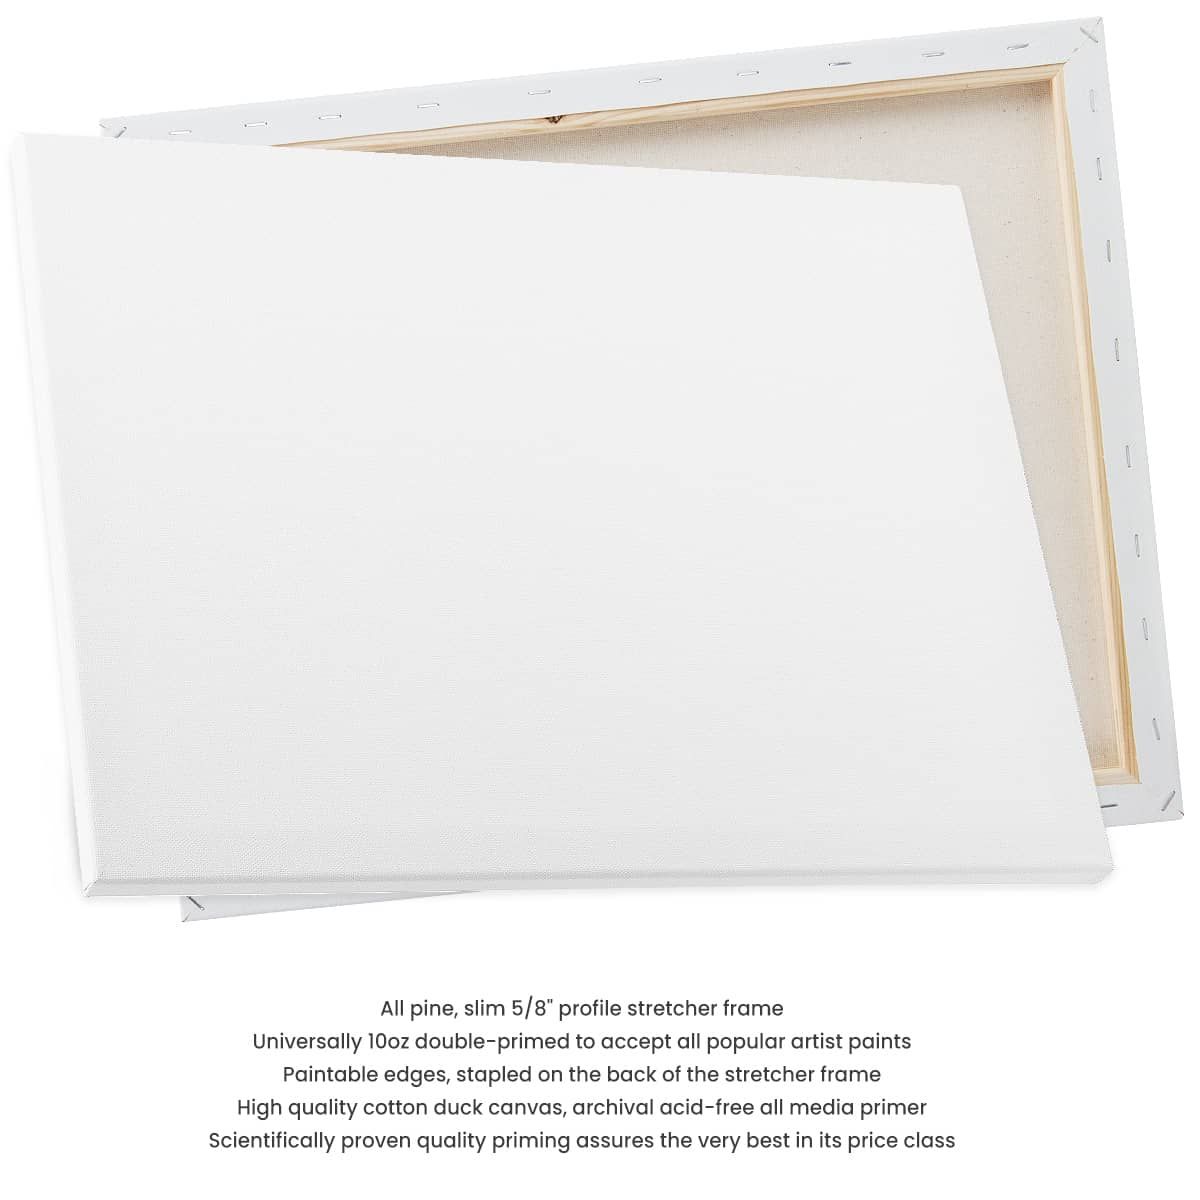 High quality low cost stretched canvas
